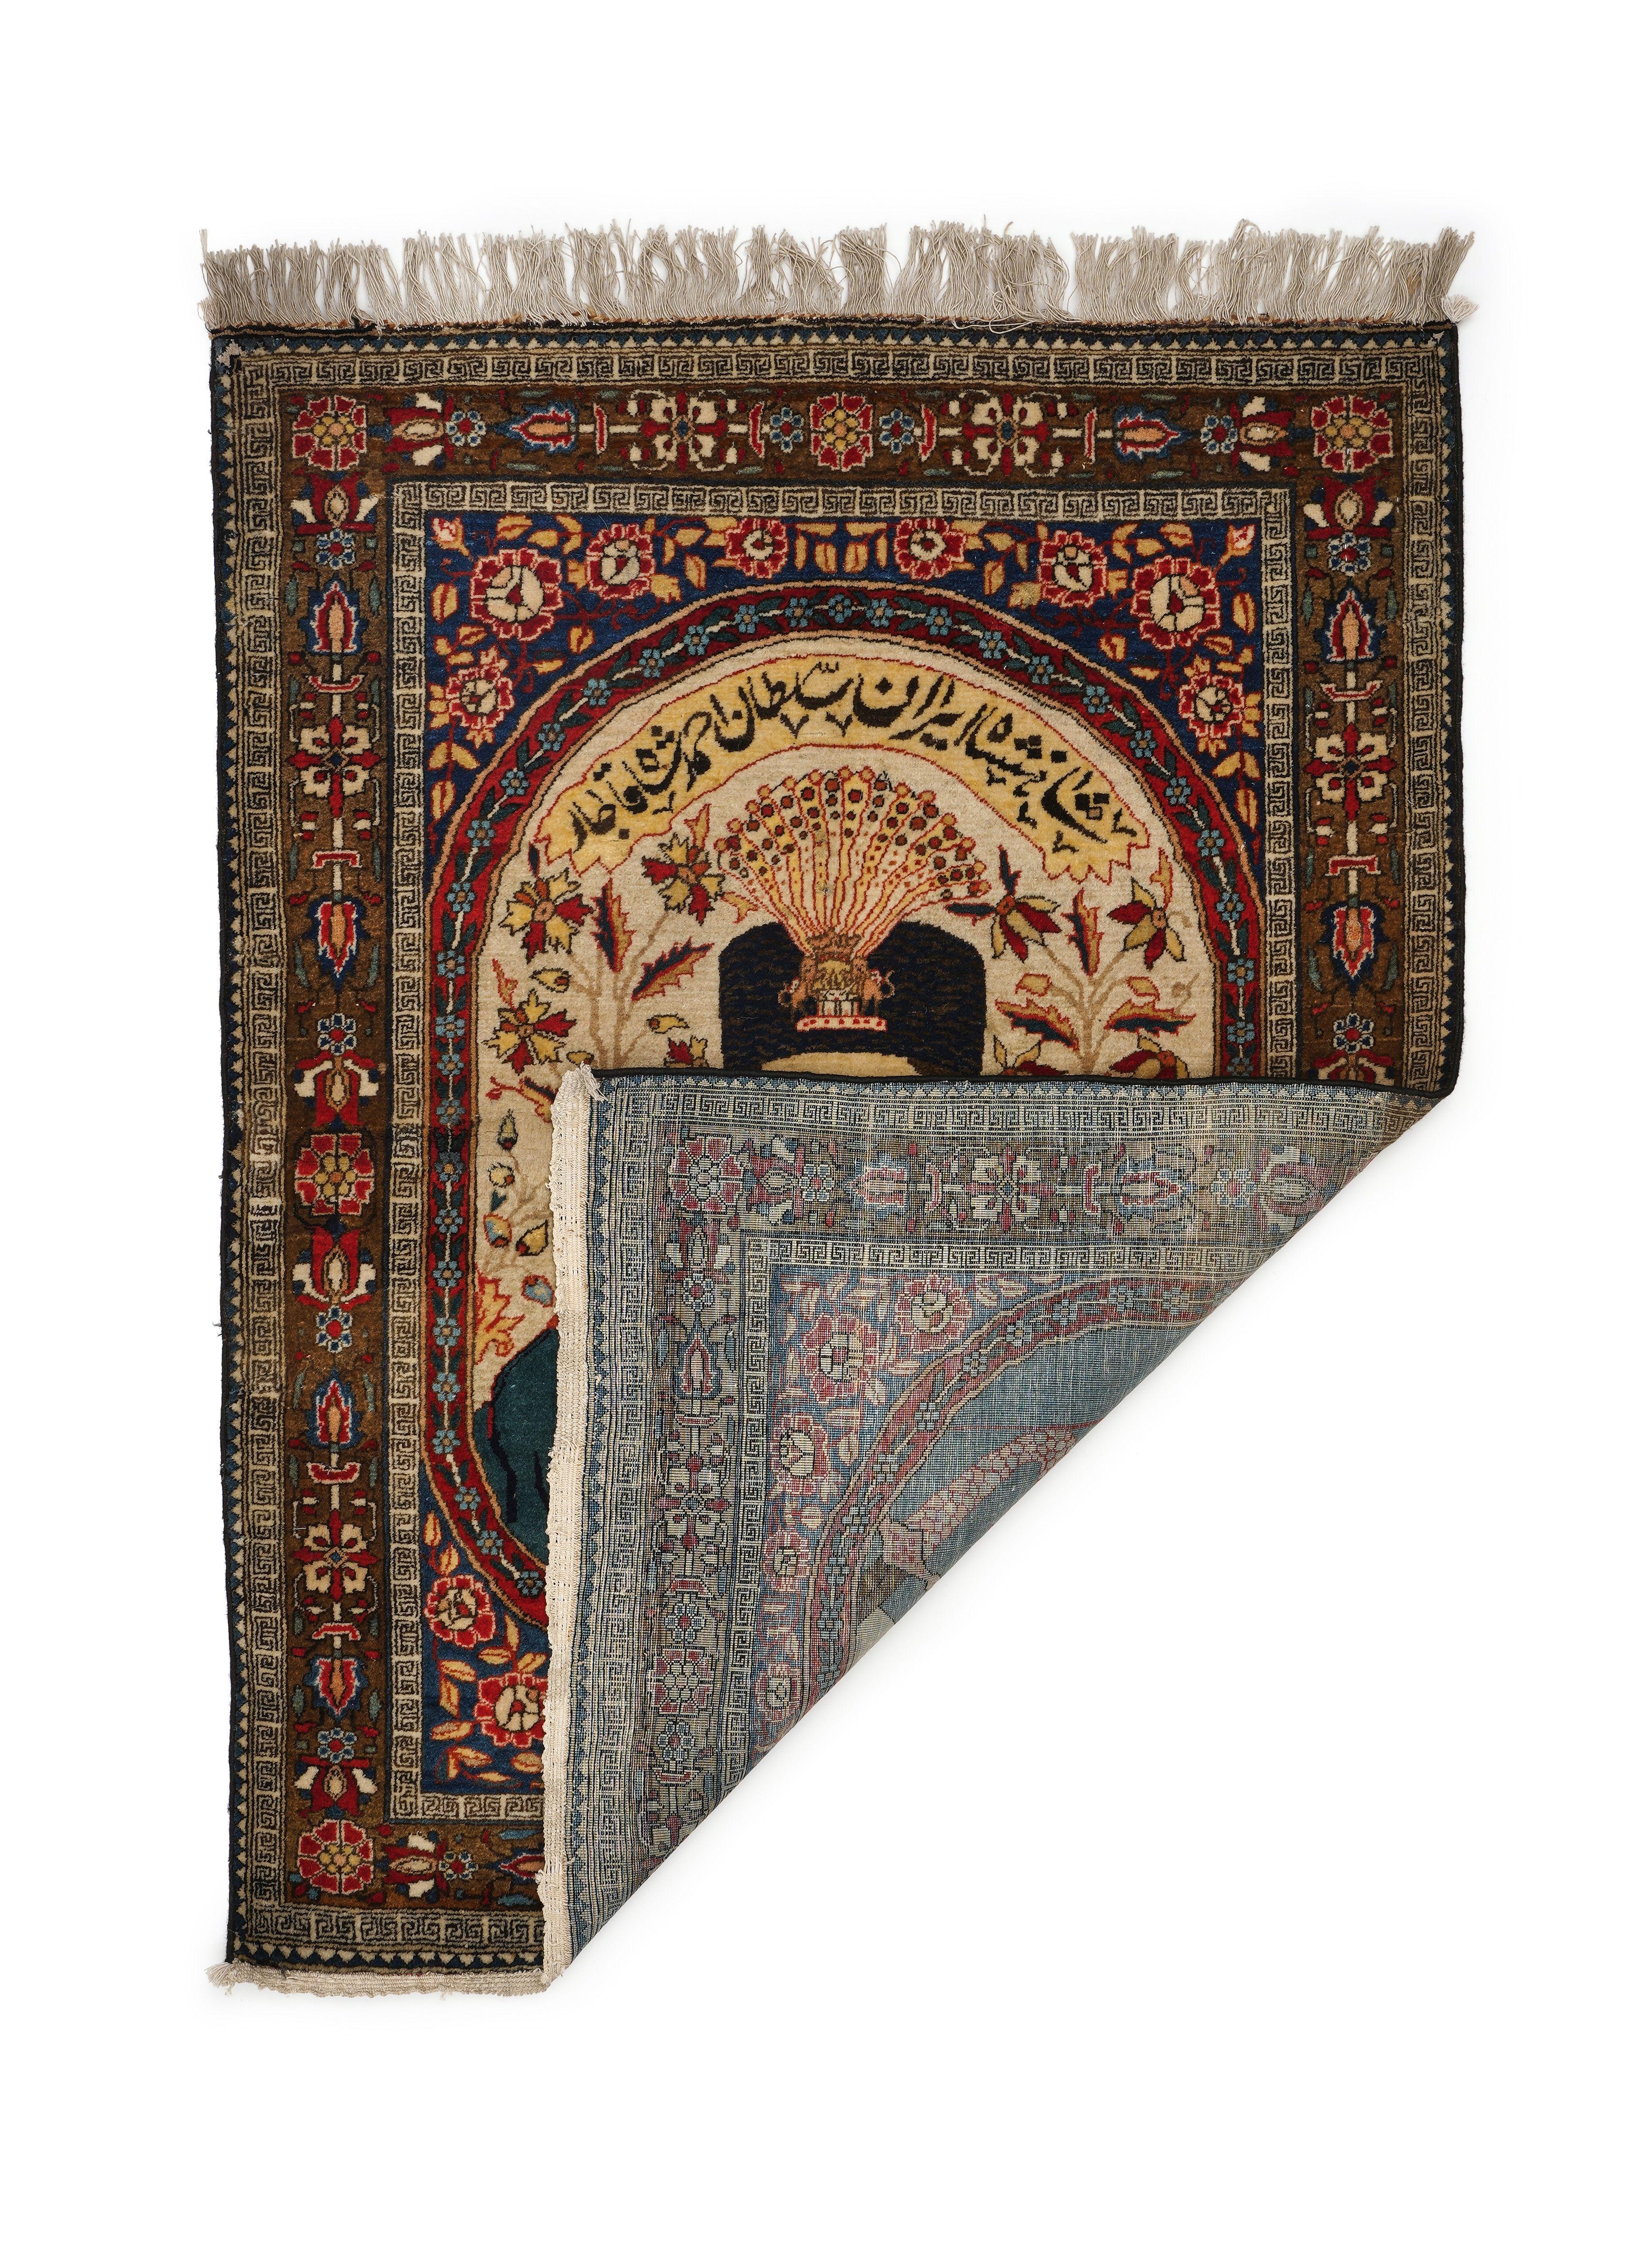 Exquisite quality Mohtasham rug depicts ruler Ahmed shah Qajar